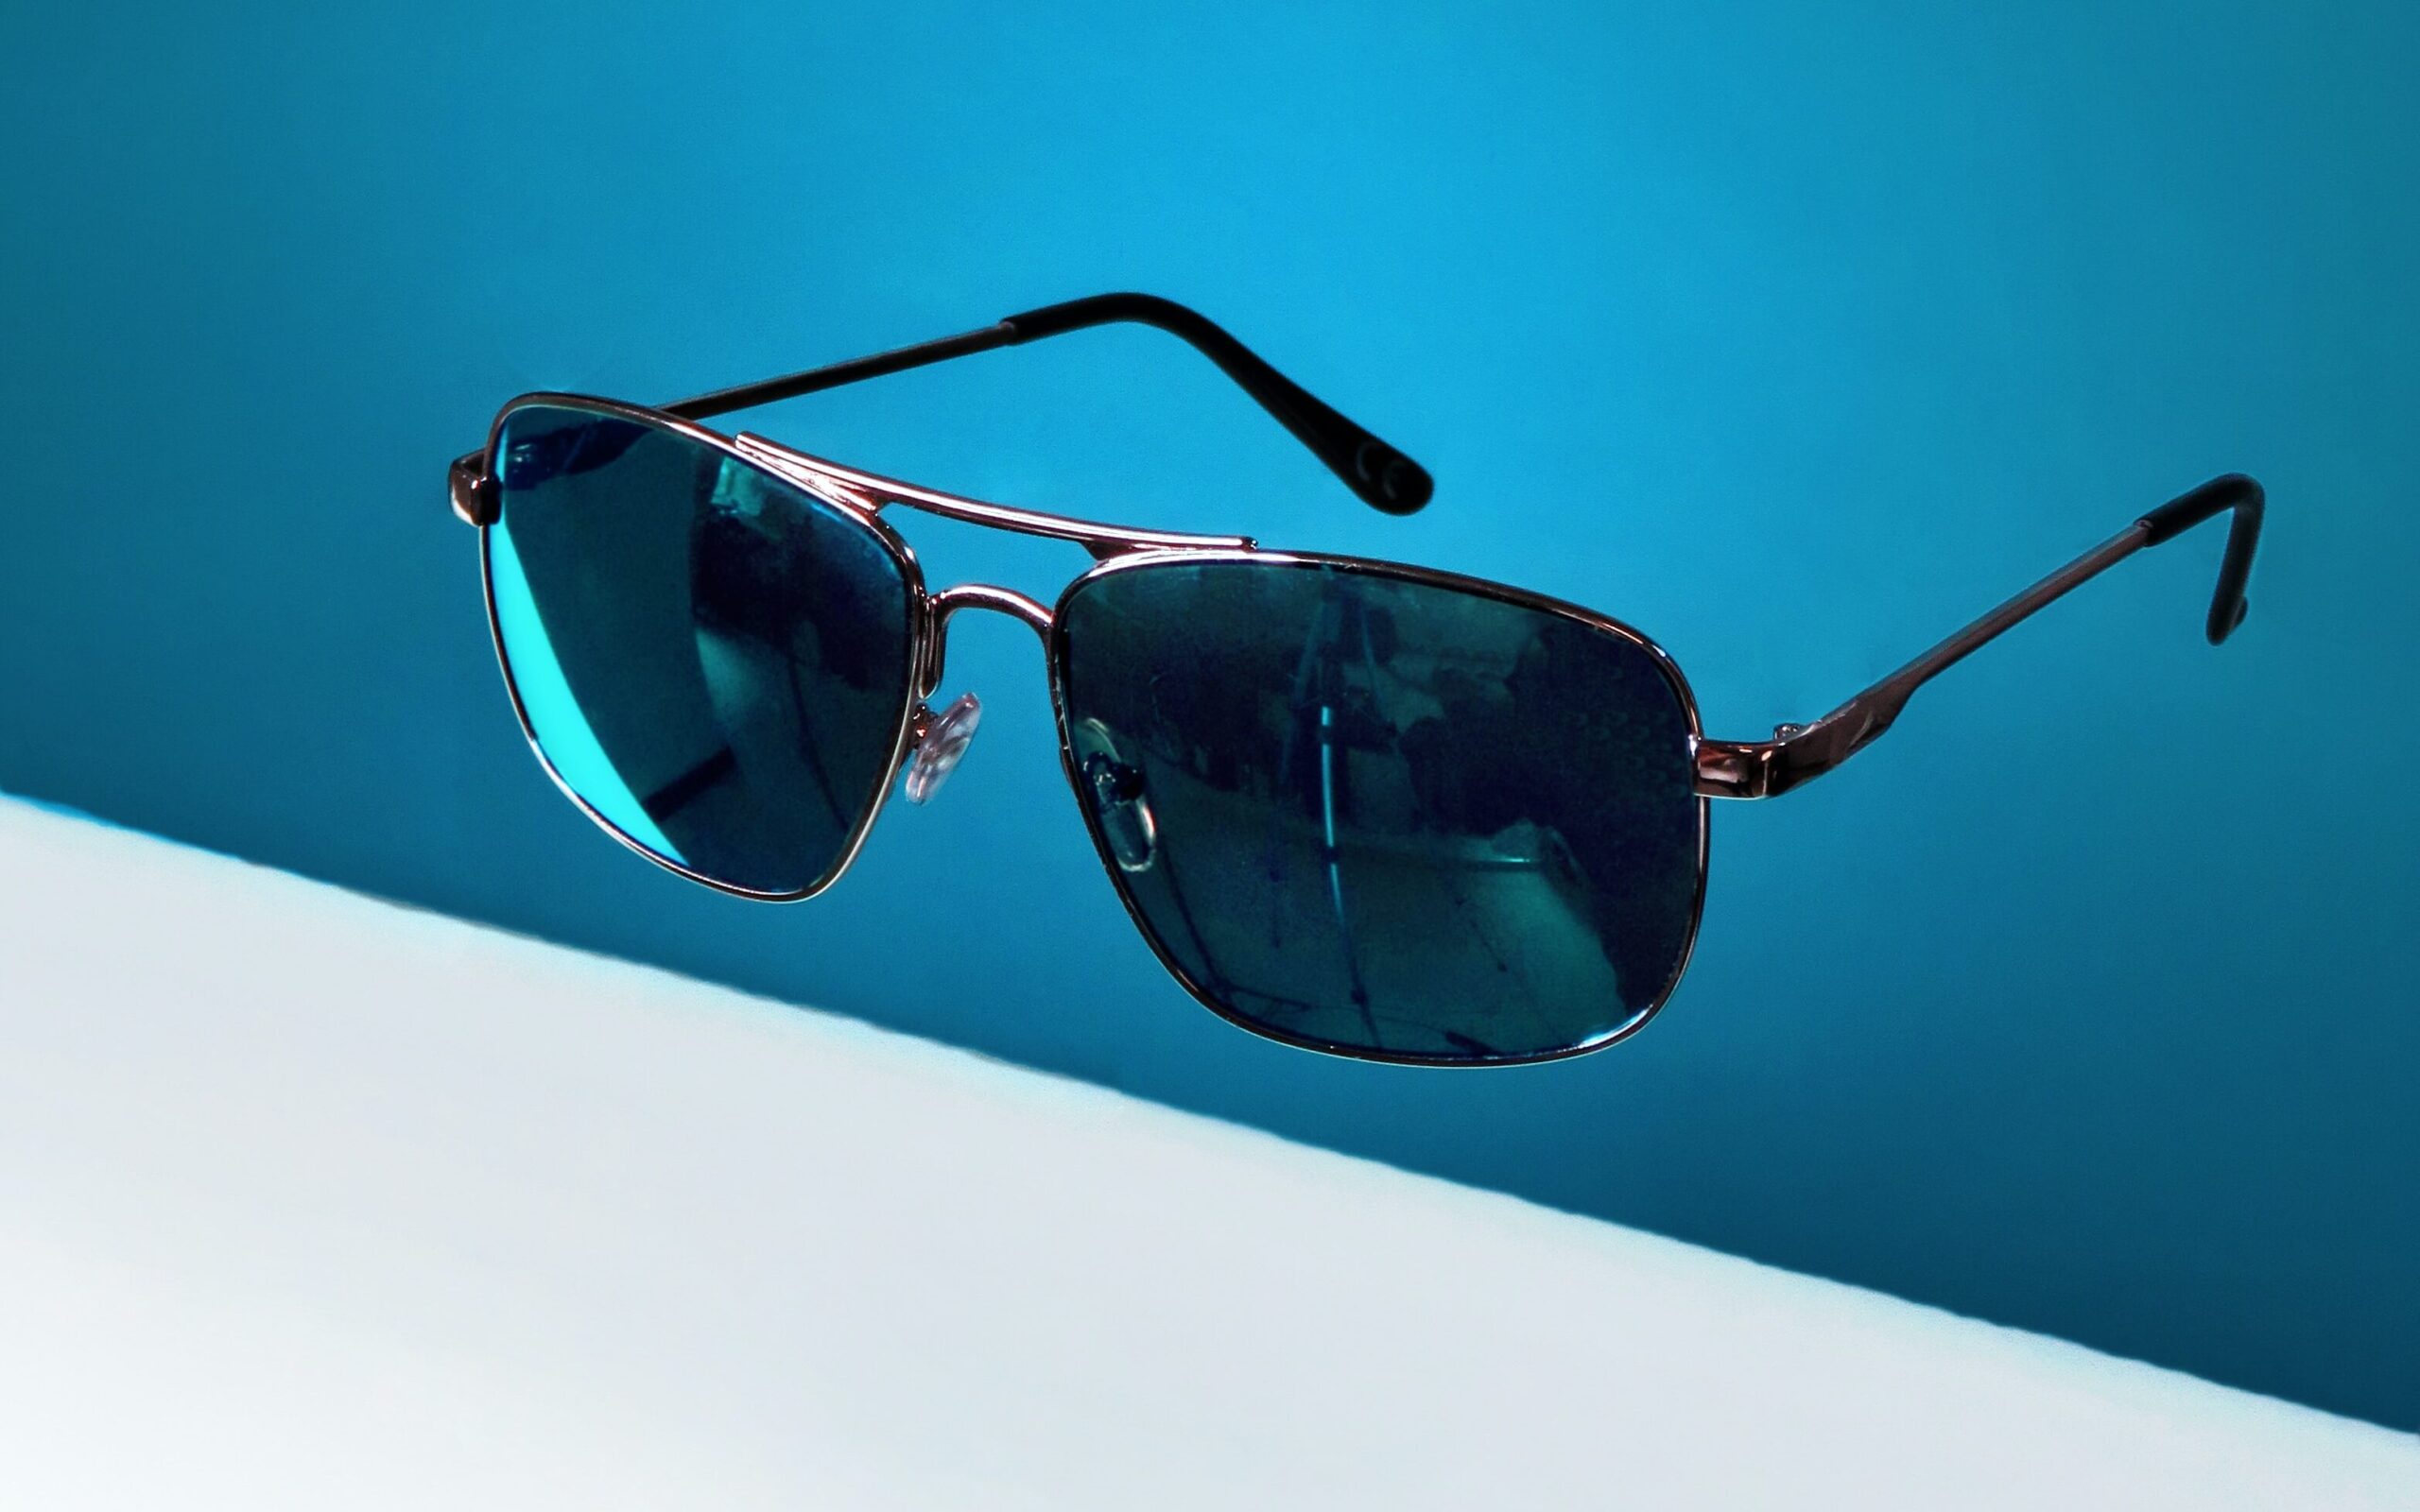 When should I replace my sunglasses?